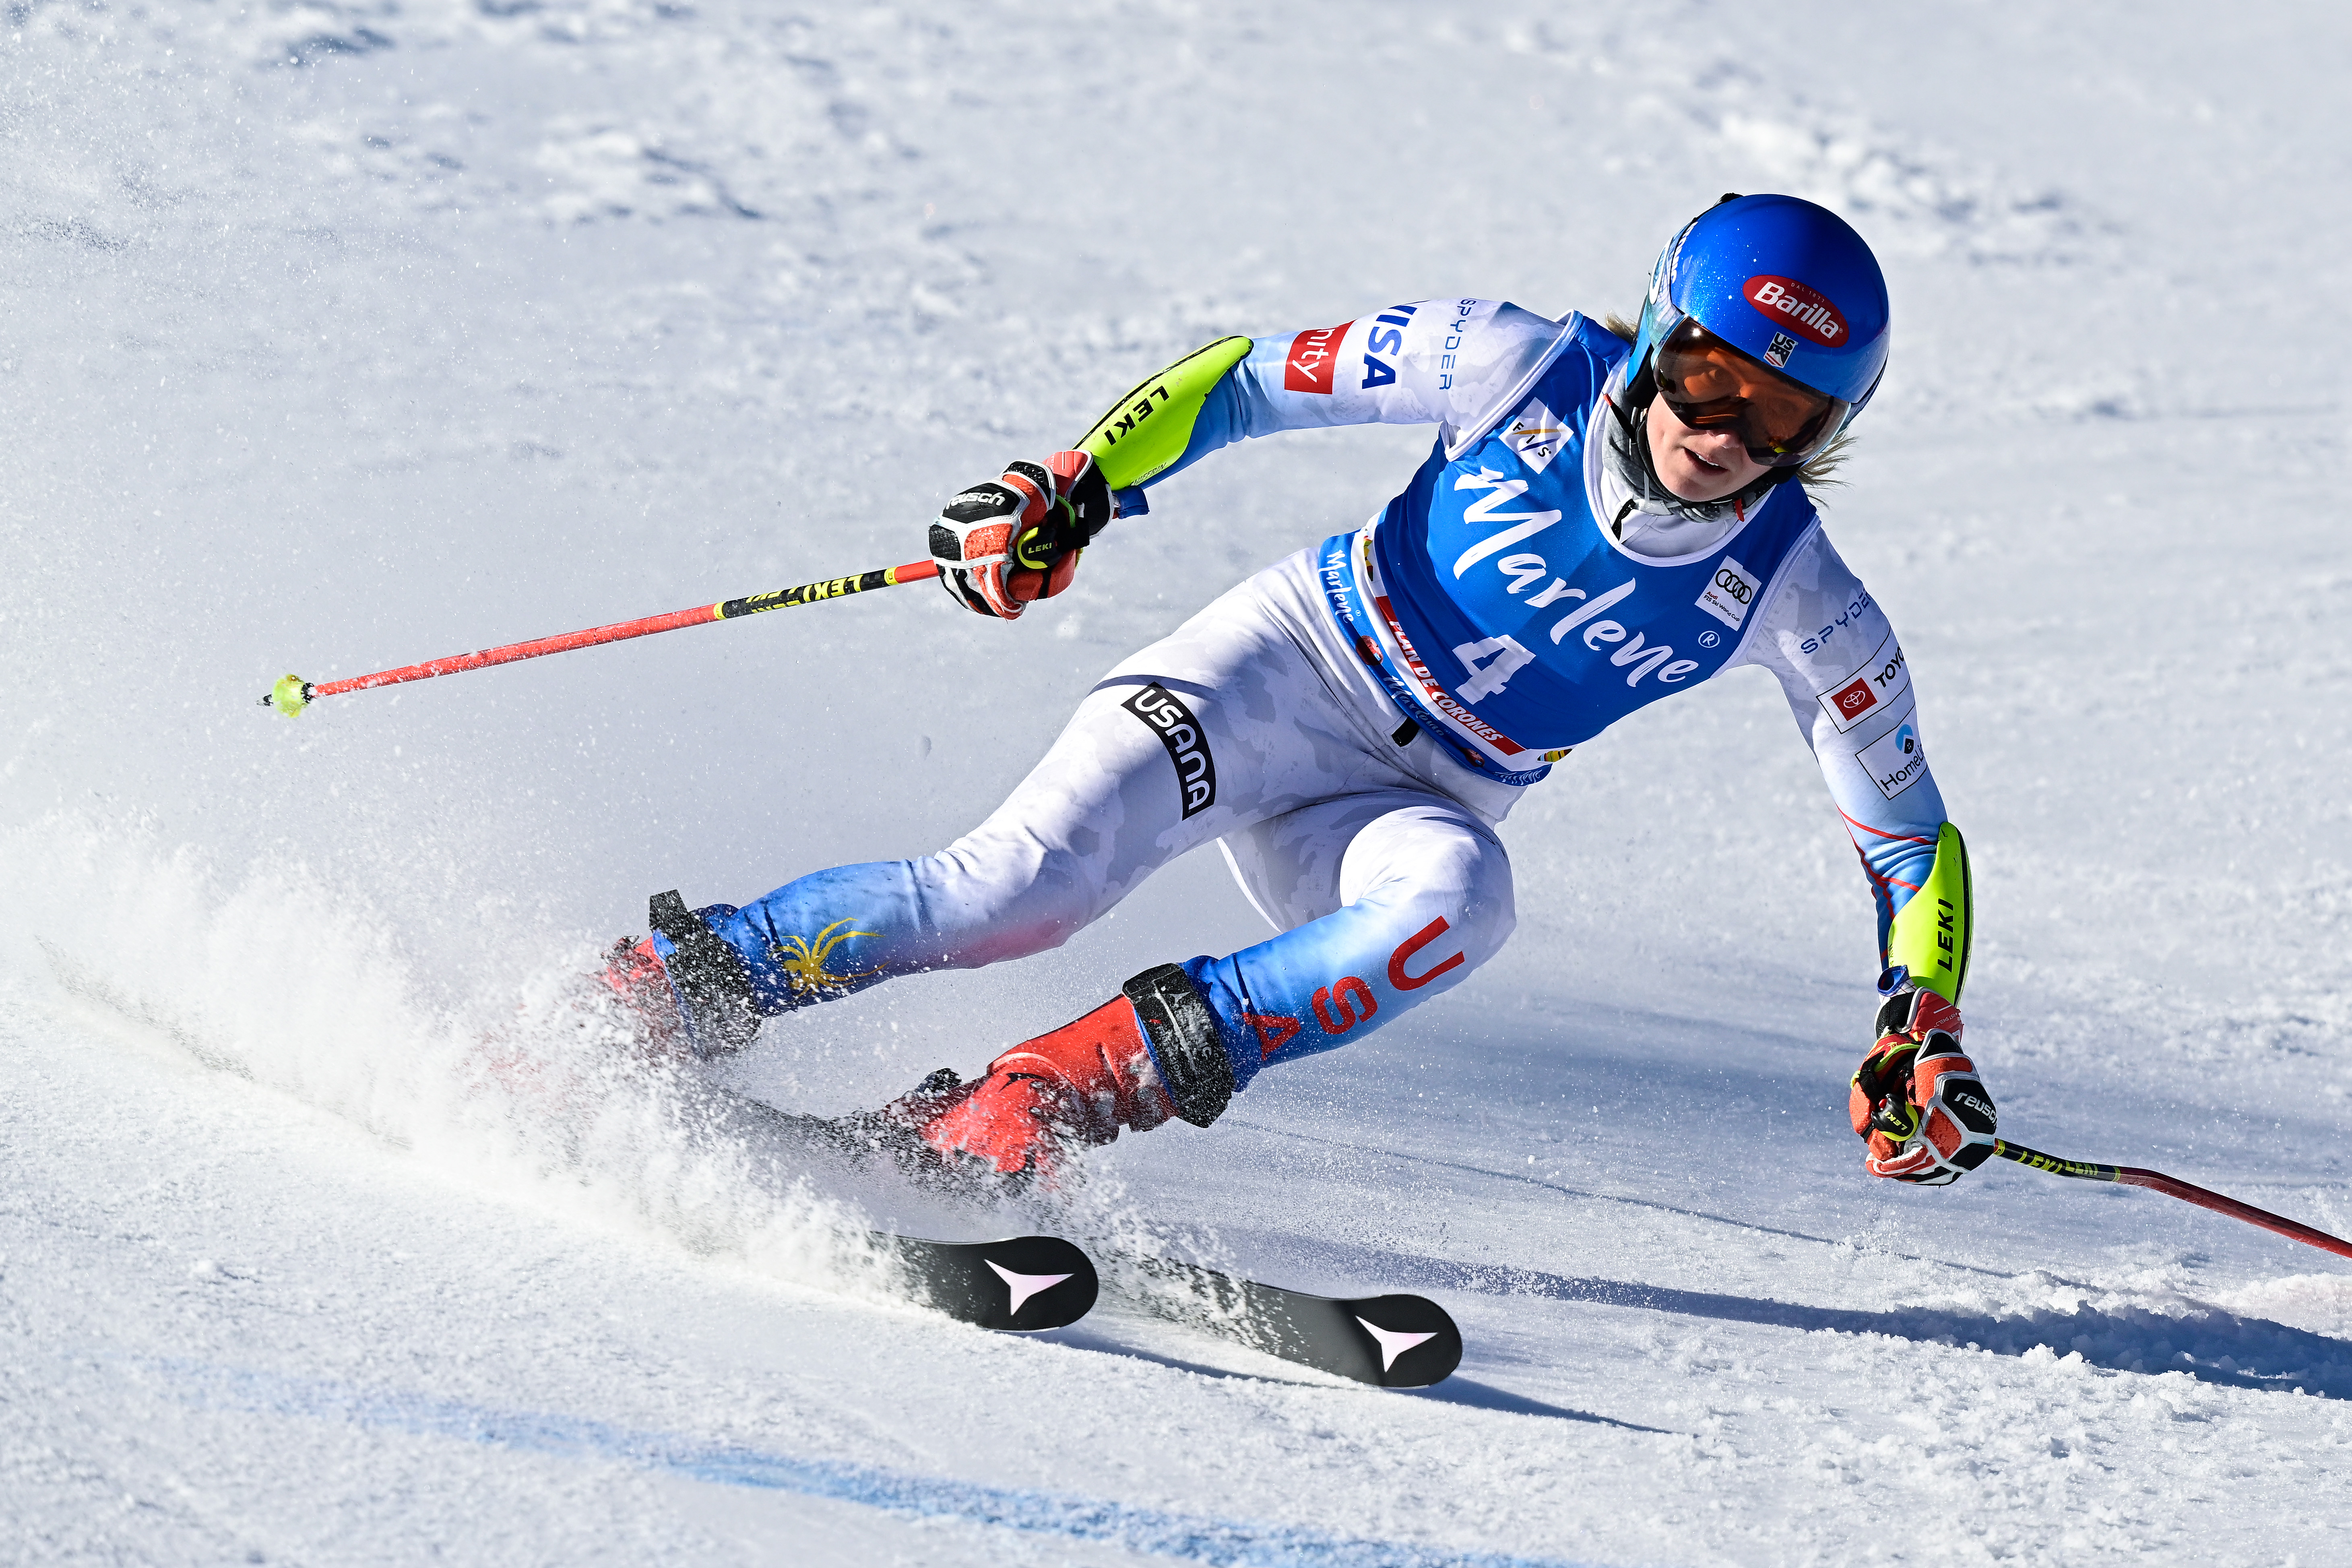 Mikaela Shiffrin of the United States competes during the Audi FIS Alpine Ski World Cup Women’s Giant Slalom on January 25, 2022 in Kronplatz, Italy.